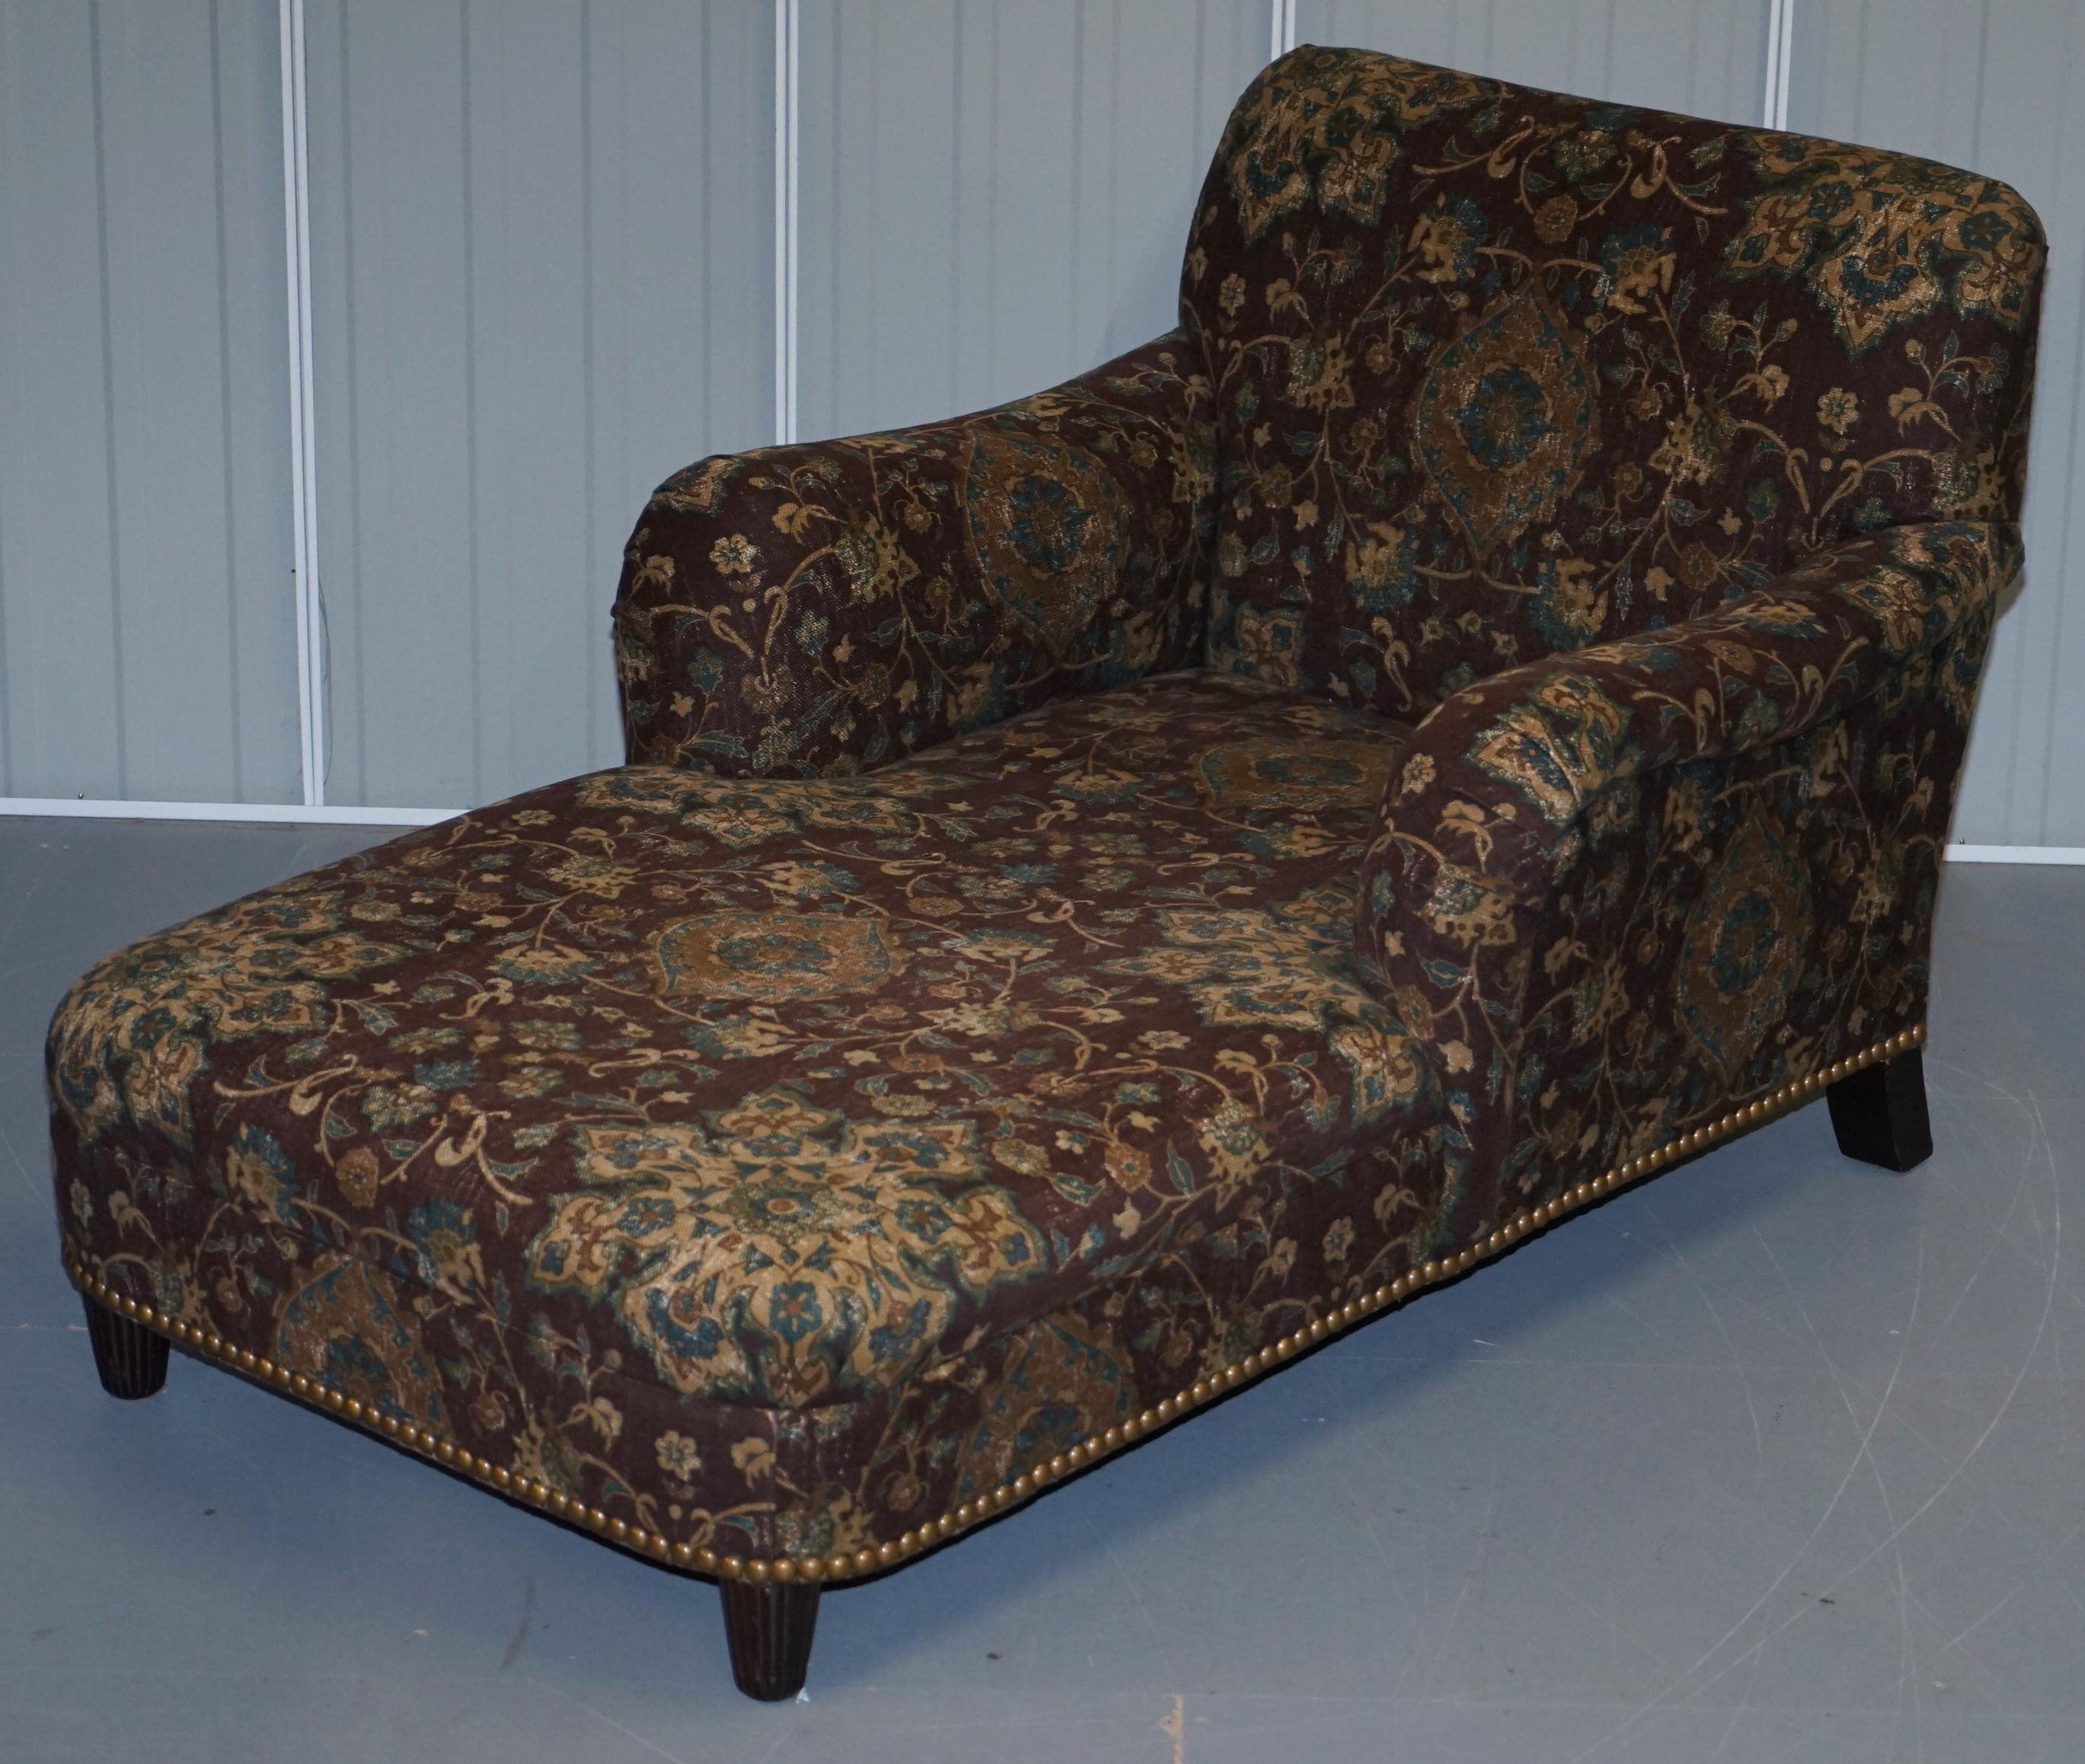 Modern Large Oversized Ralph Lauren Chaise Lounge Sofa Armchair Floral Upholstery